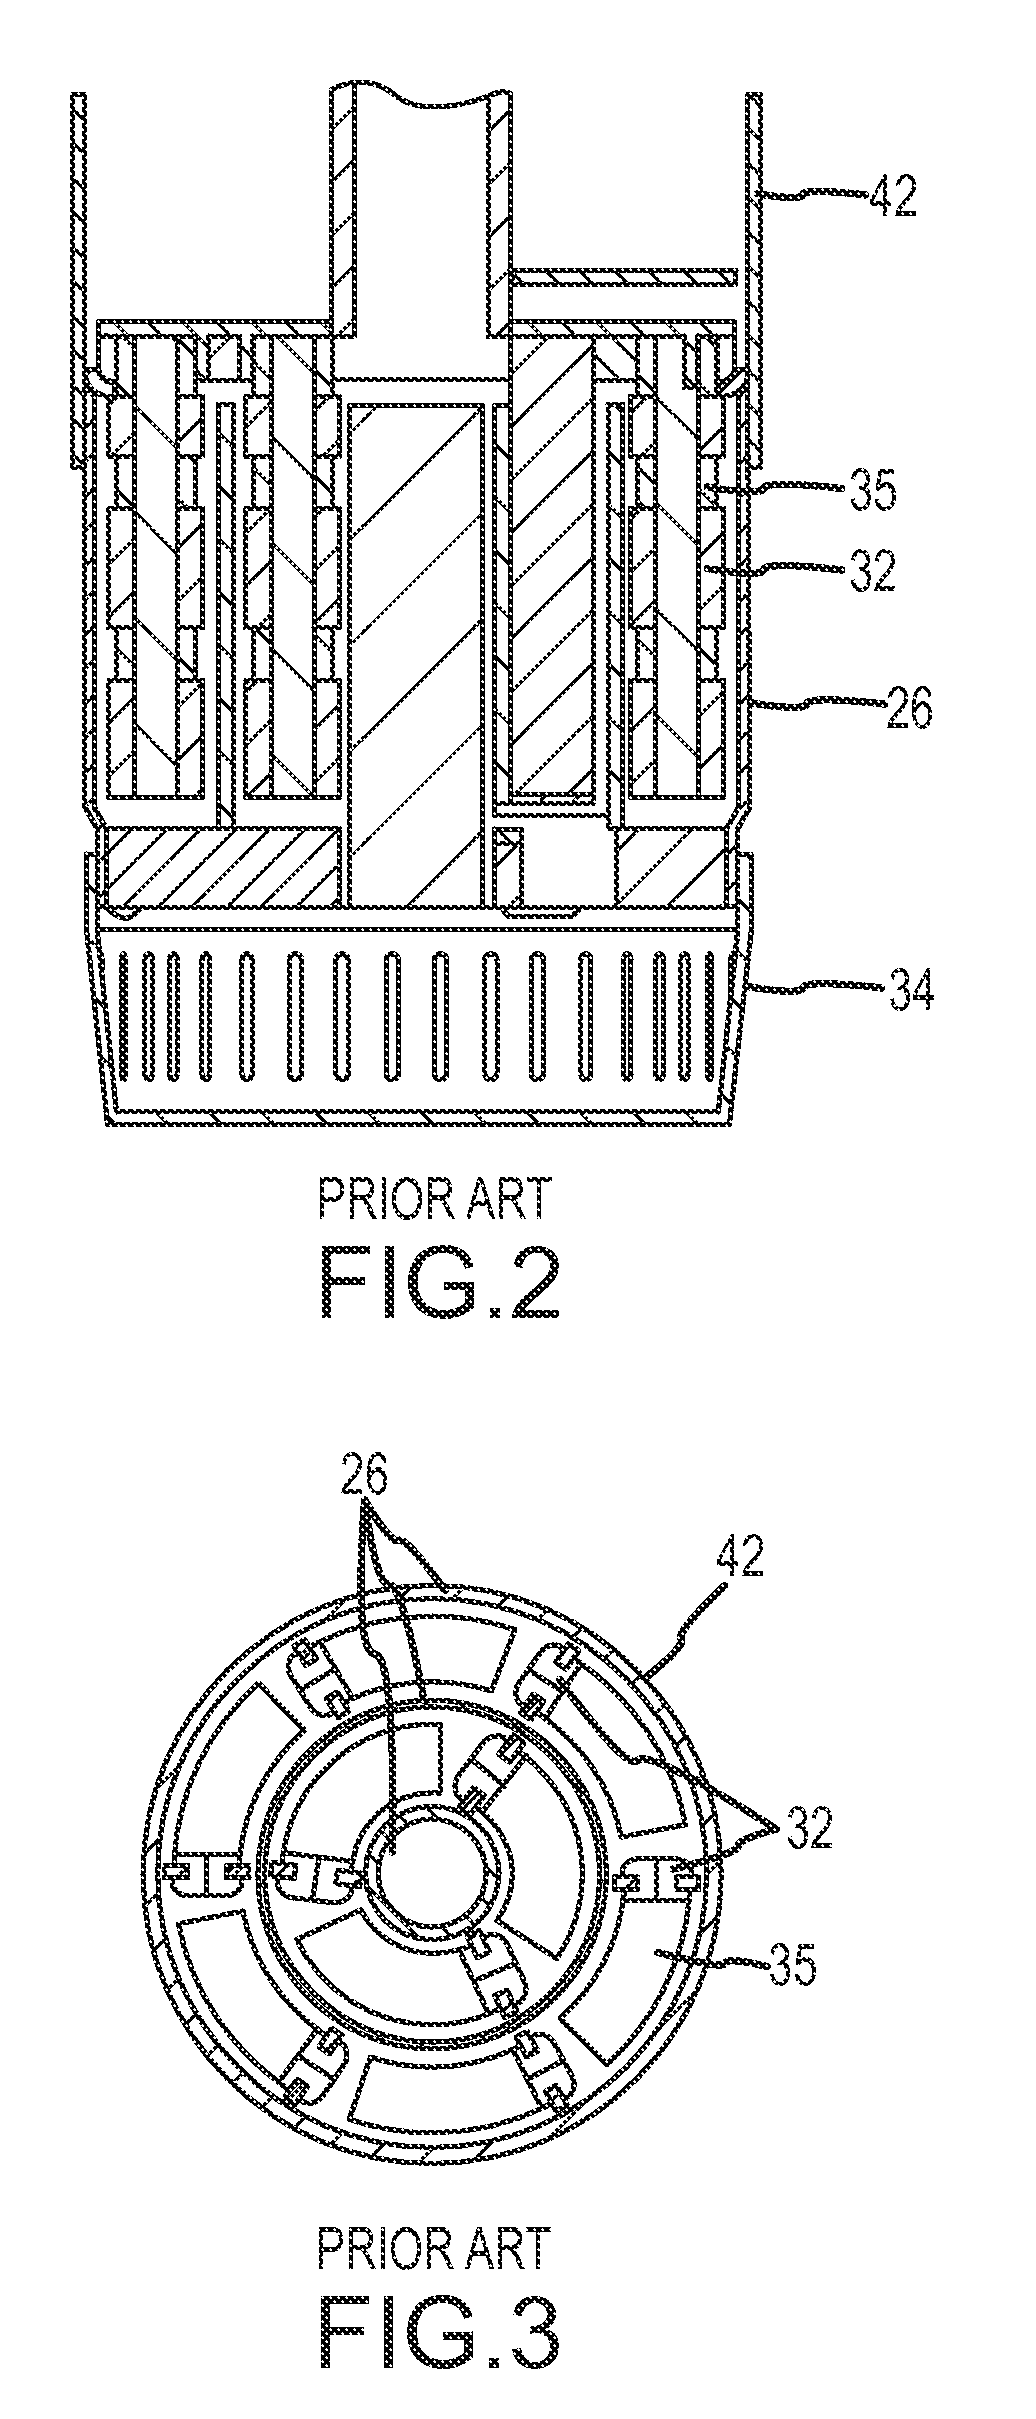 High current density cathode for electrorefining in molten electrolyte